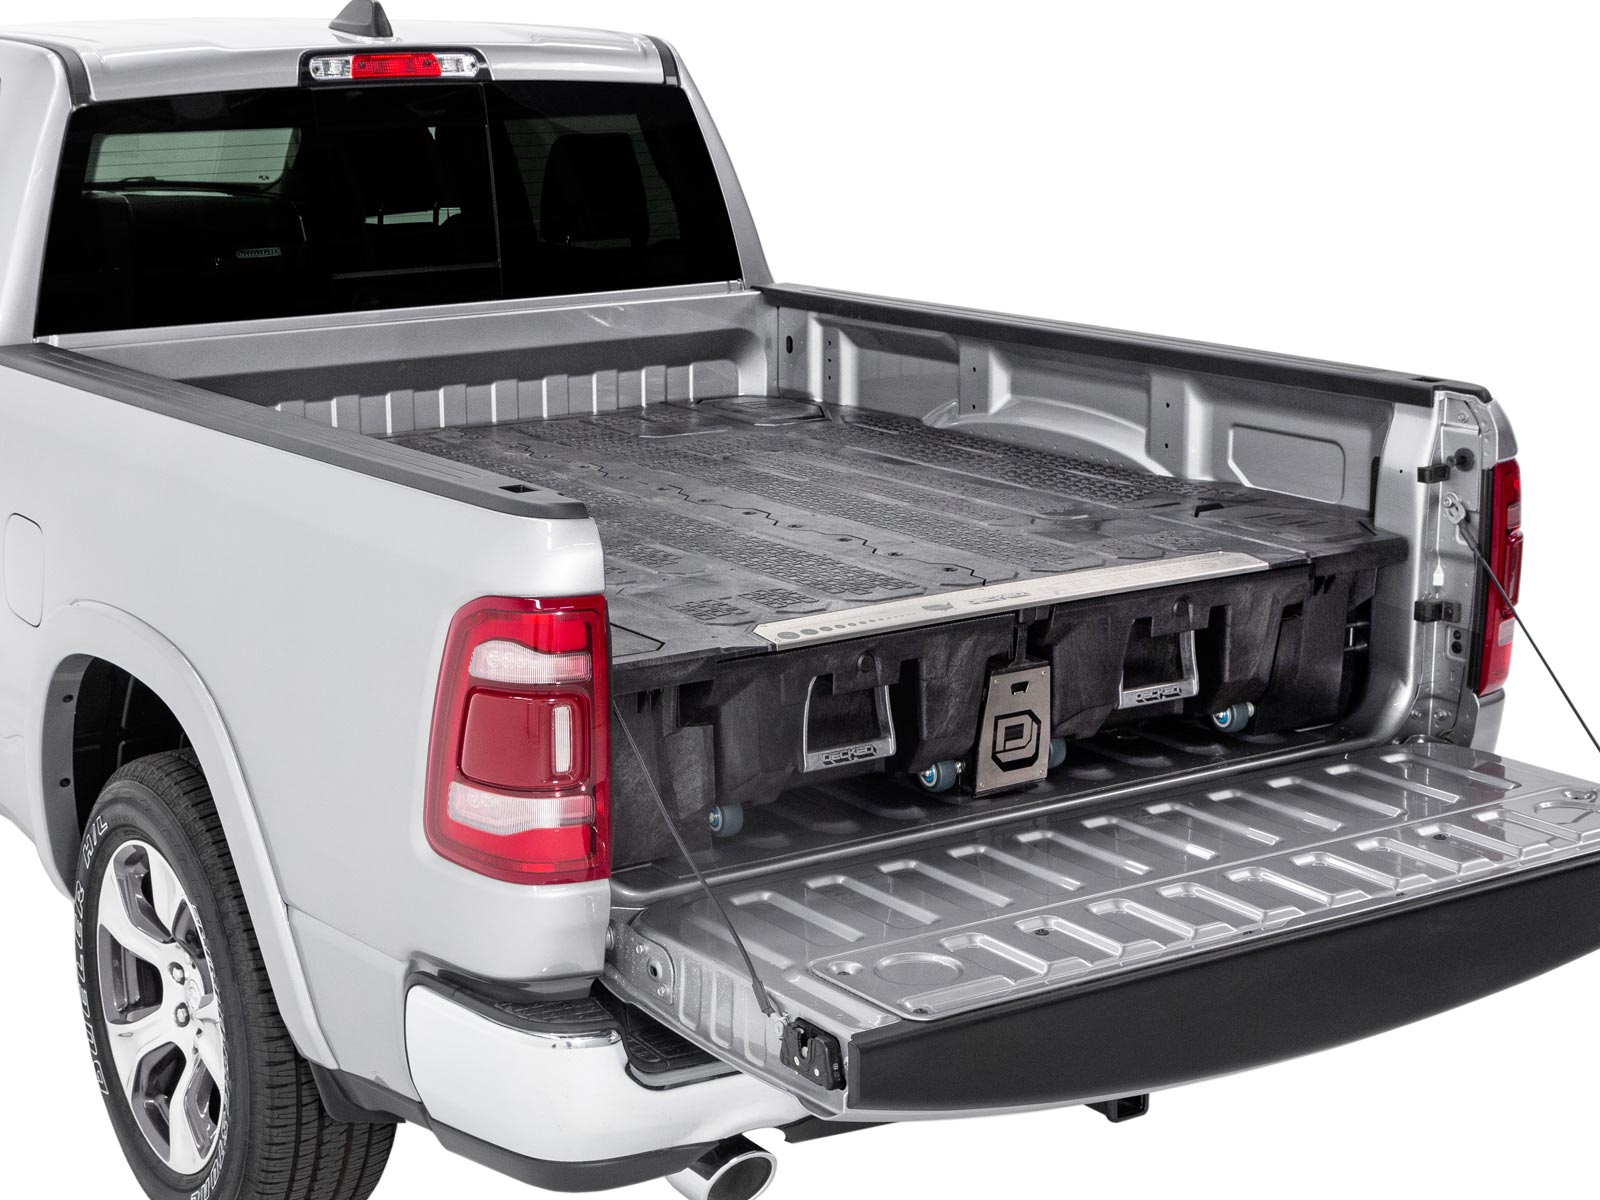 2019 Ford F150 Truck Bed Accessories | RealTruck